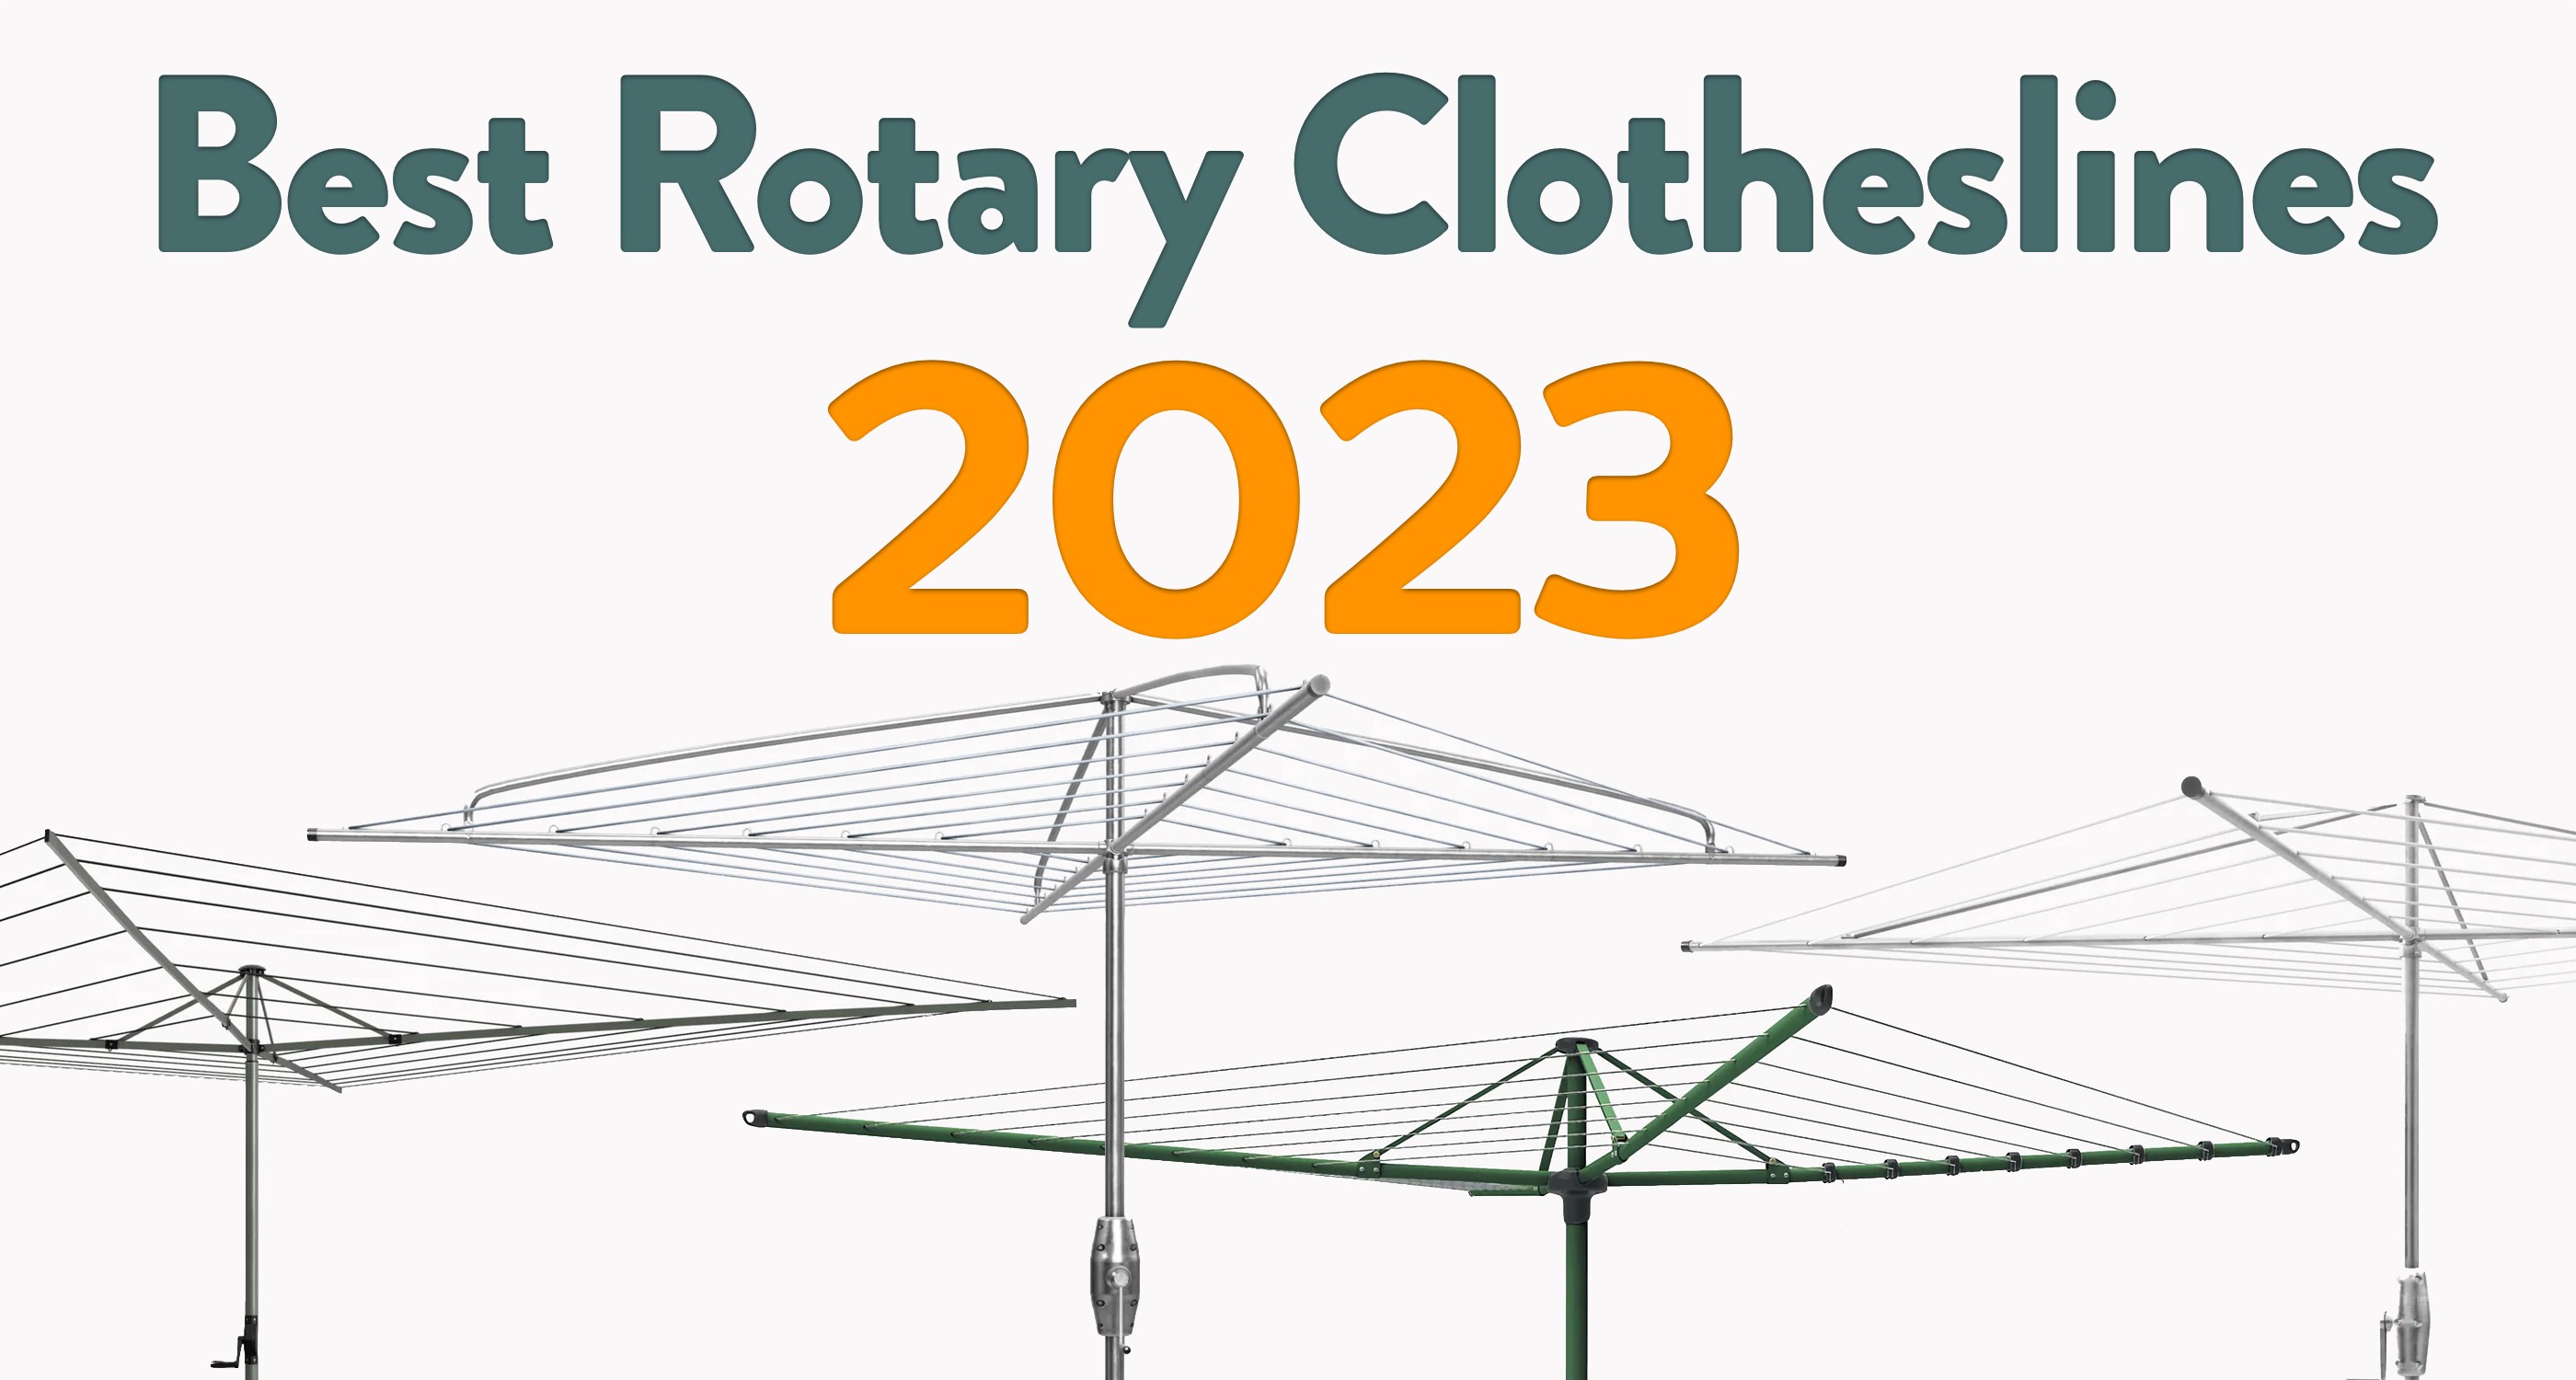 Best Rotary Washing Lines in 2023 thumbnail